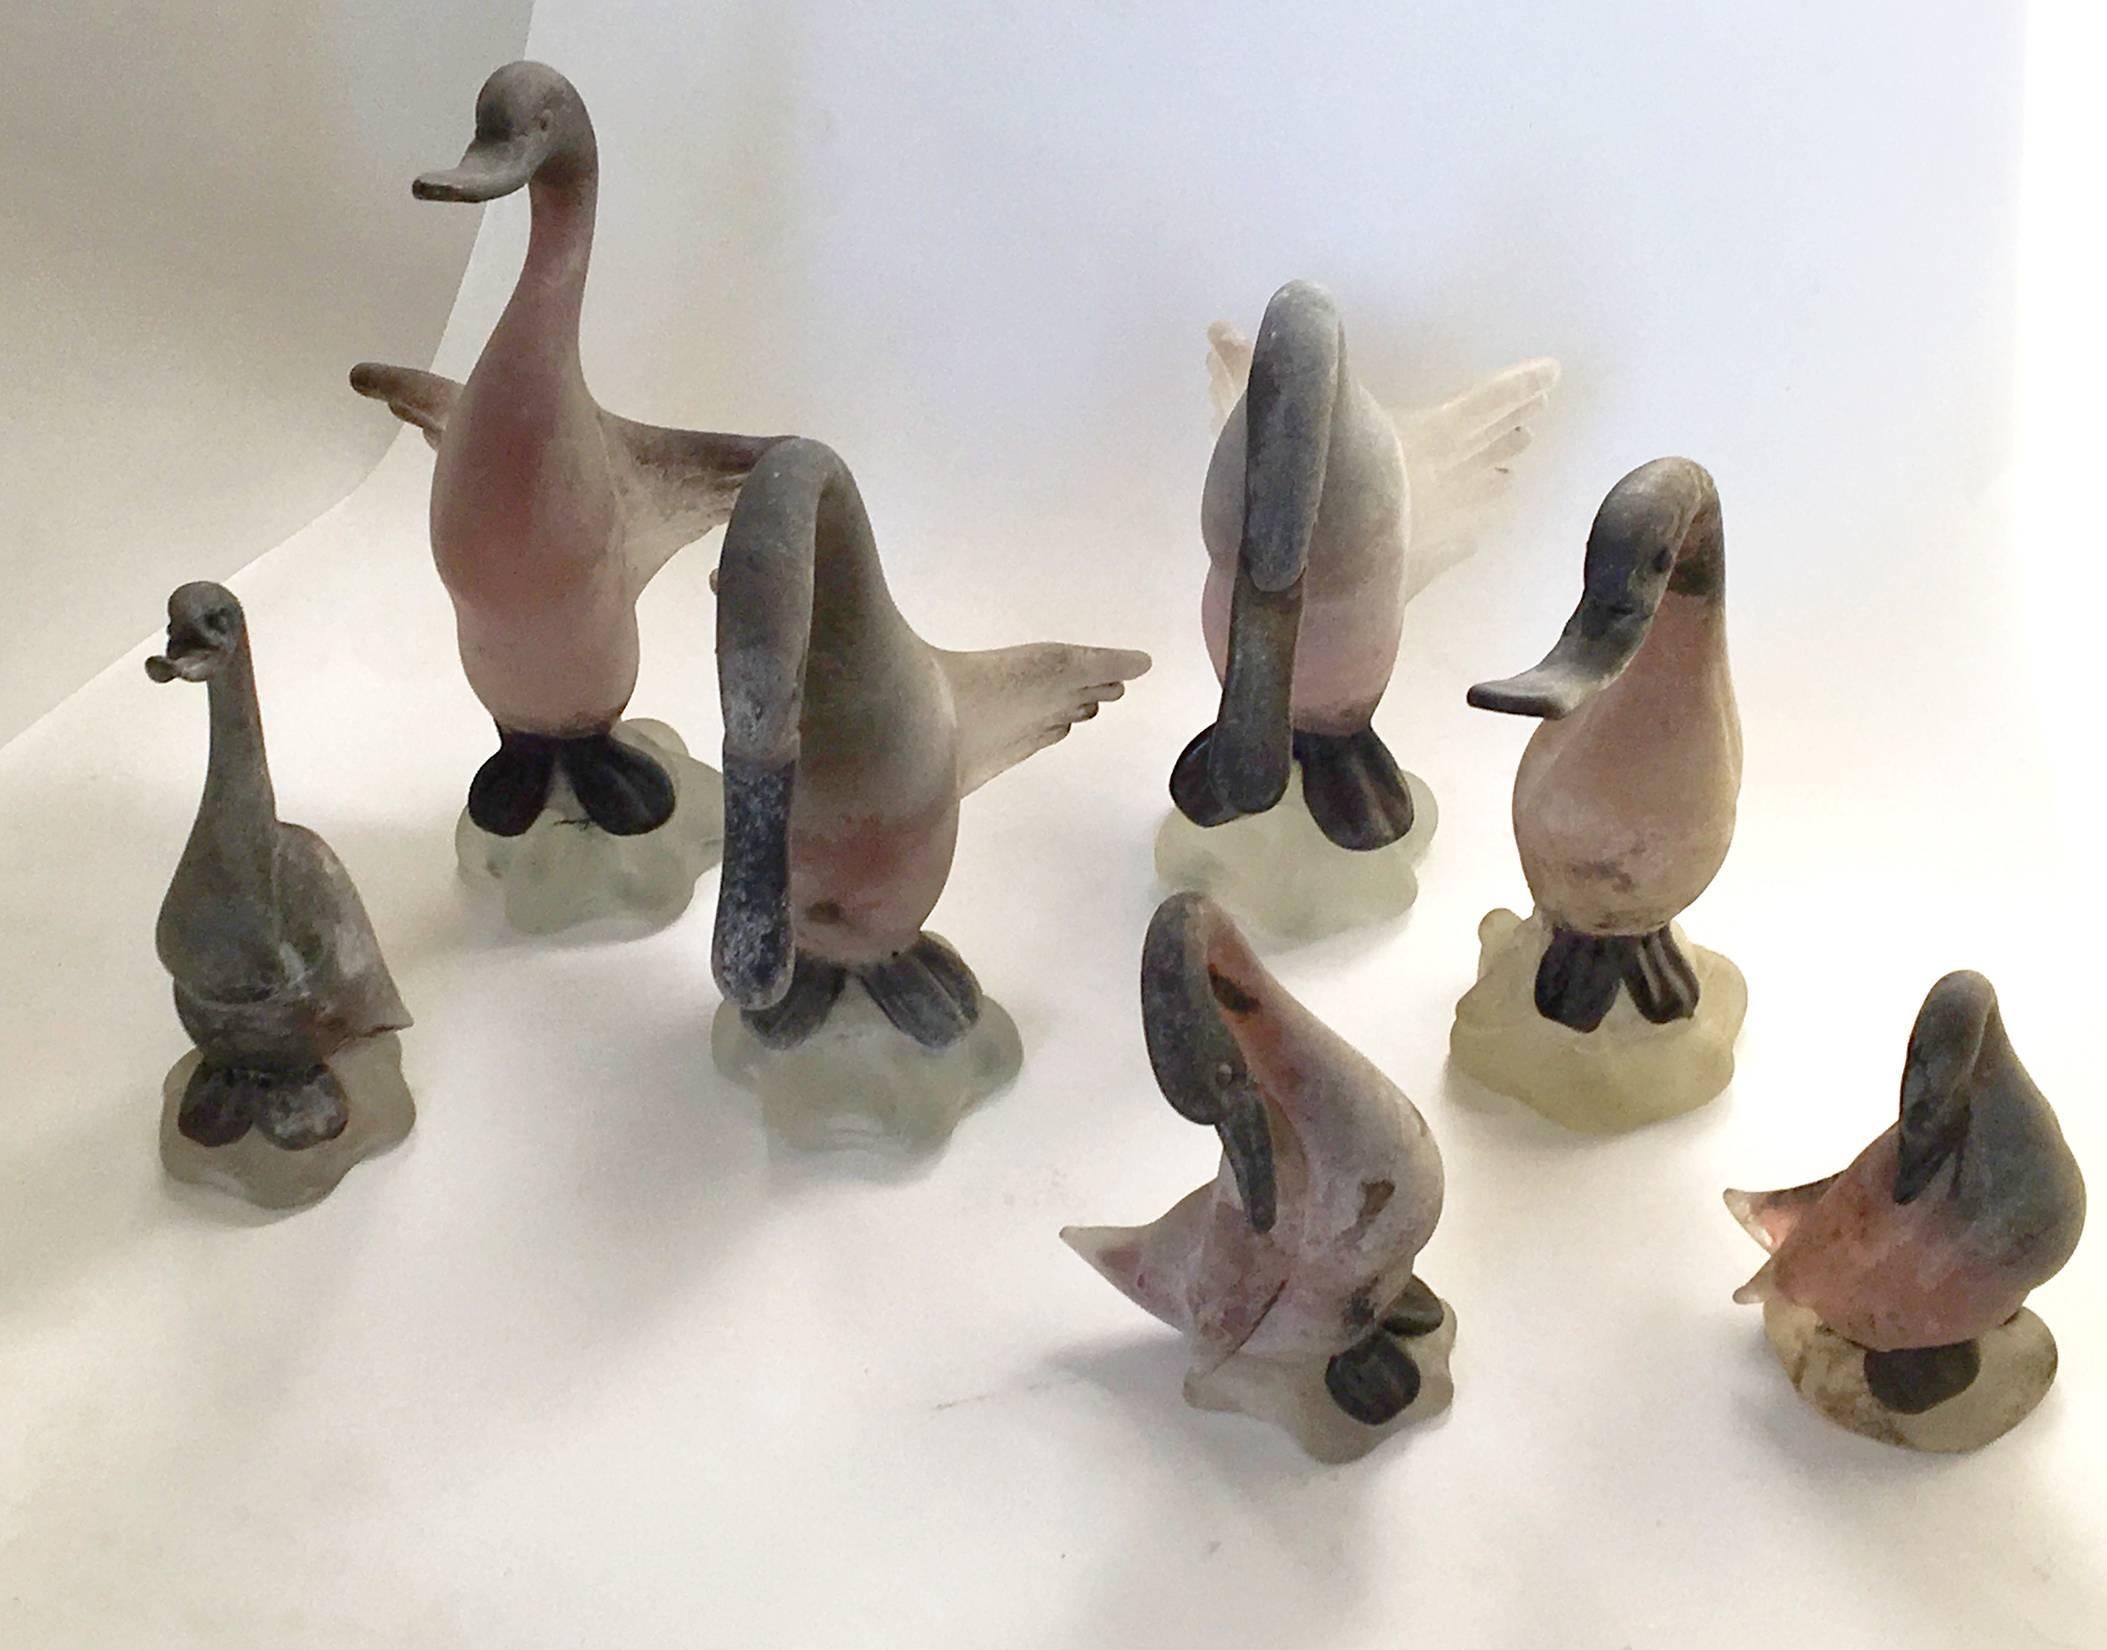 An assembled collection of seven birds (swans, ducks, geese, your call) by Antonio da Ros for Cenedese in the scavo technique. Four large birds, two small birds and one medium. The larger pieces are signed 'Cenedese' and two of the smaller pieces